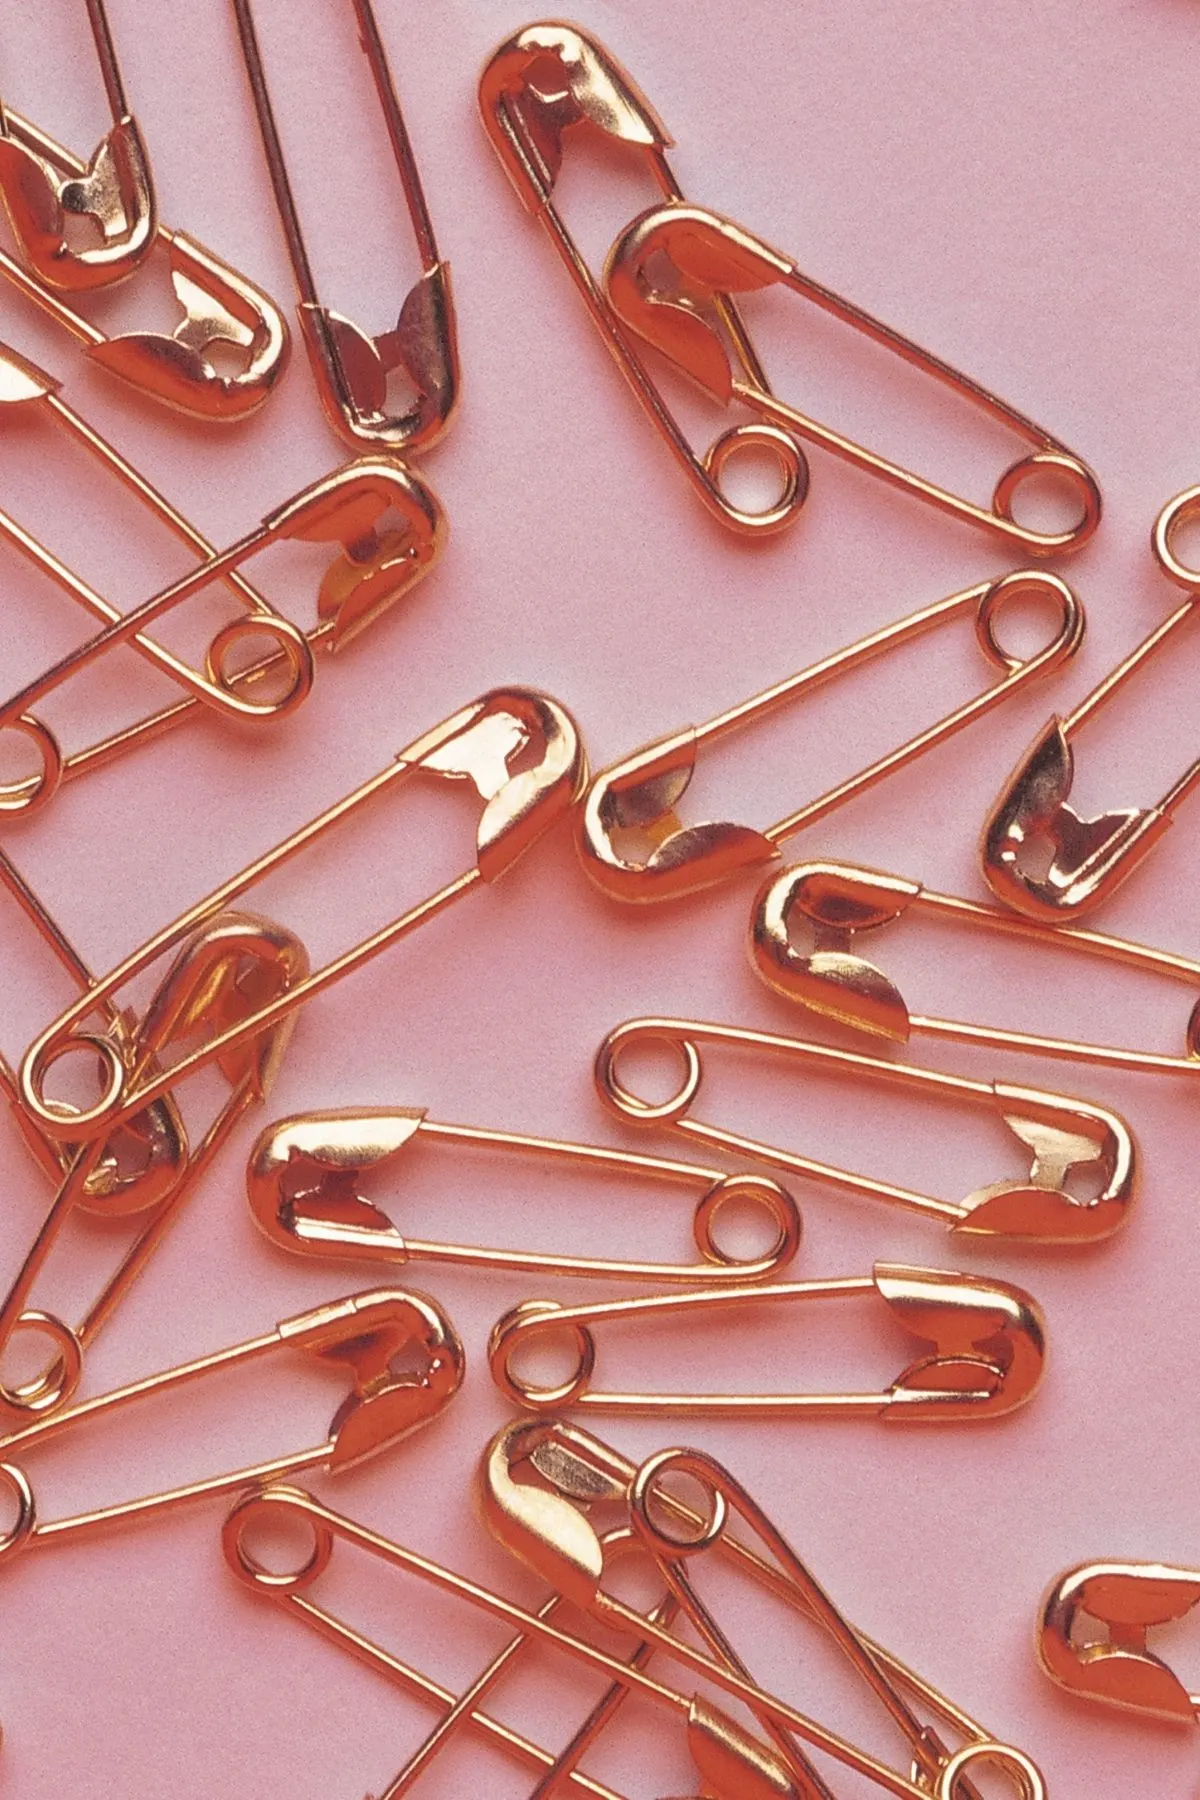 Gold safety pins on pink background.